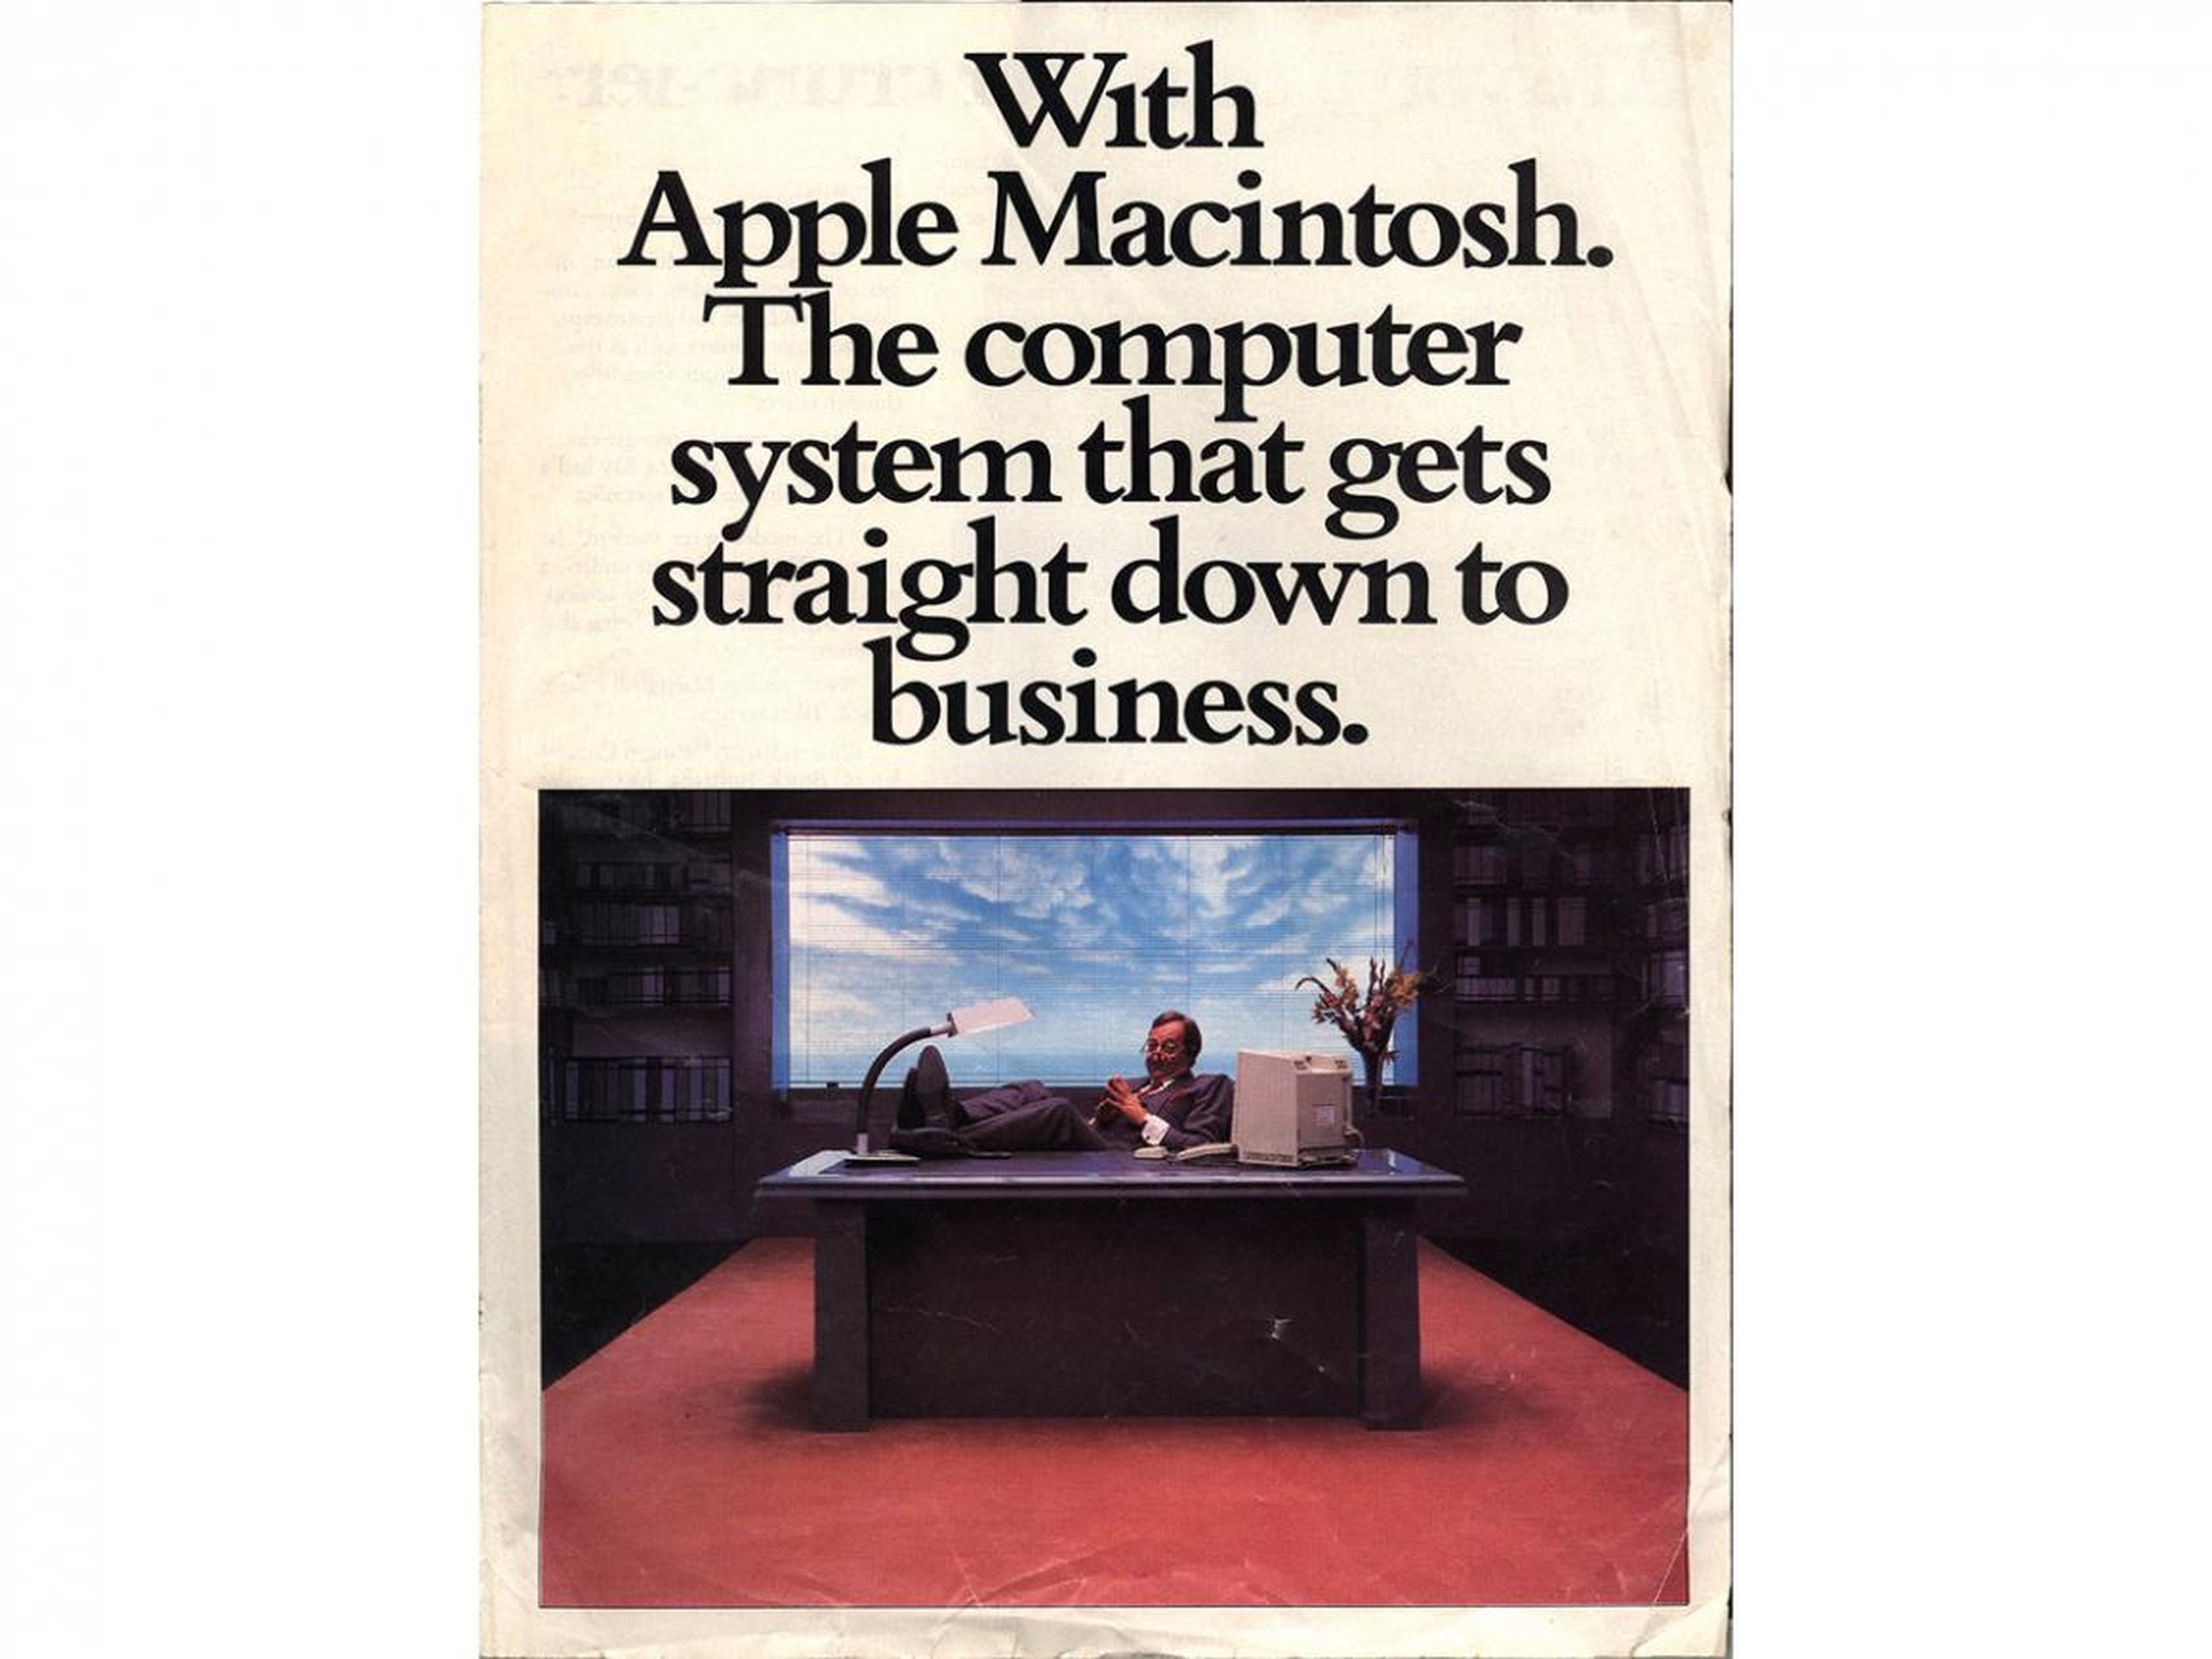 Apple tried to appeal to the business crowd back in the mid 1980s.